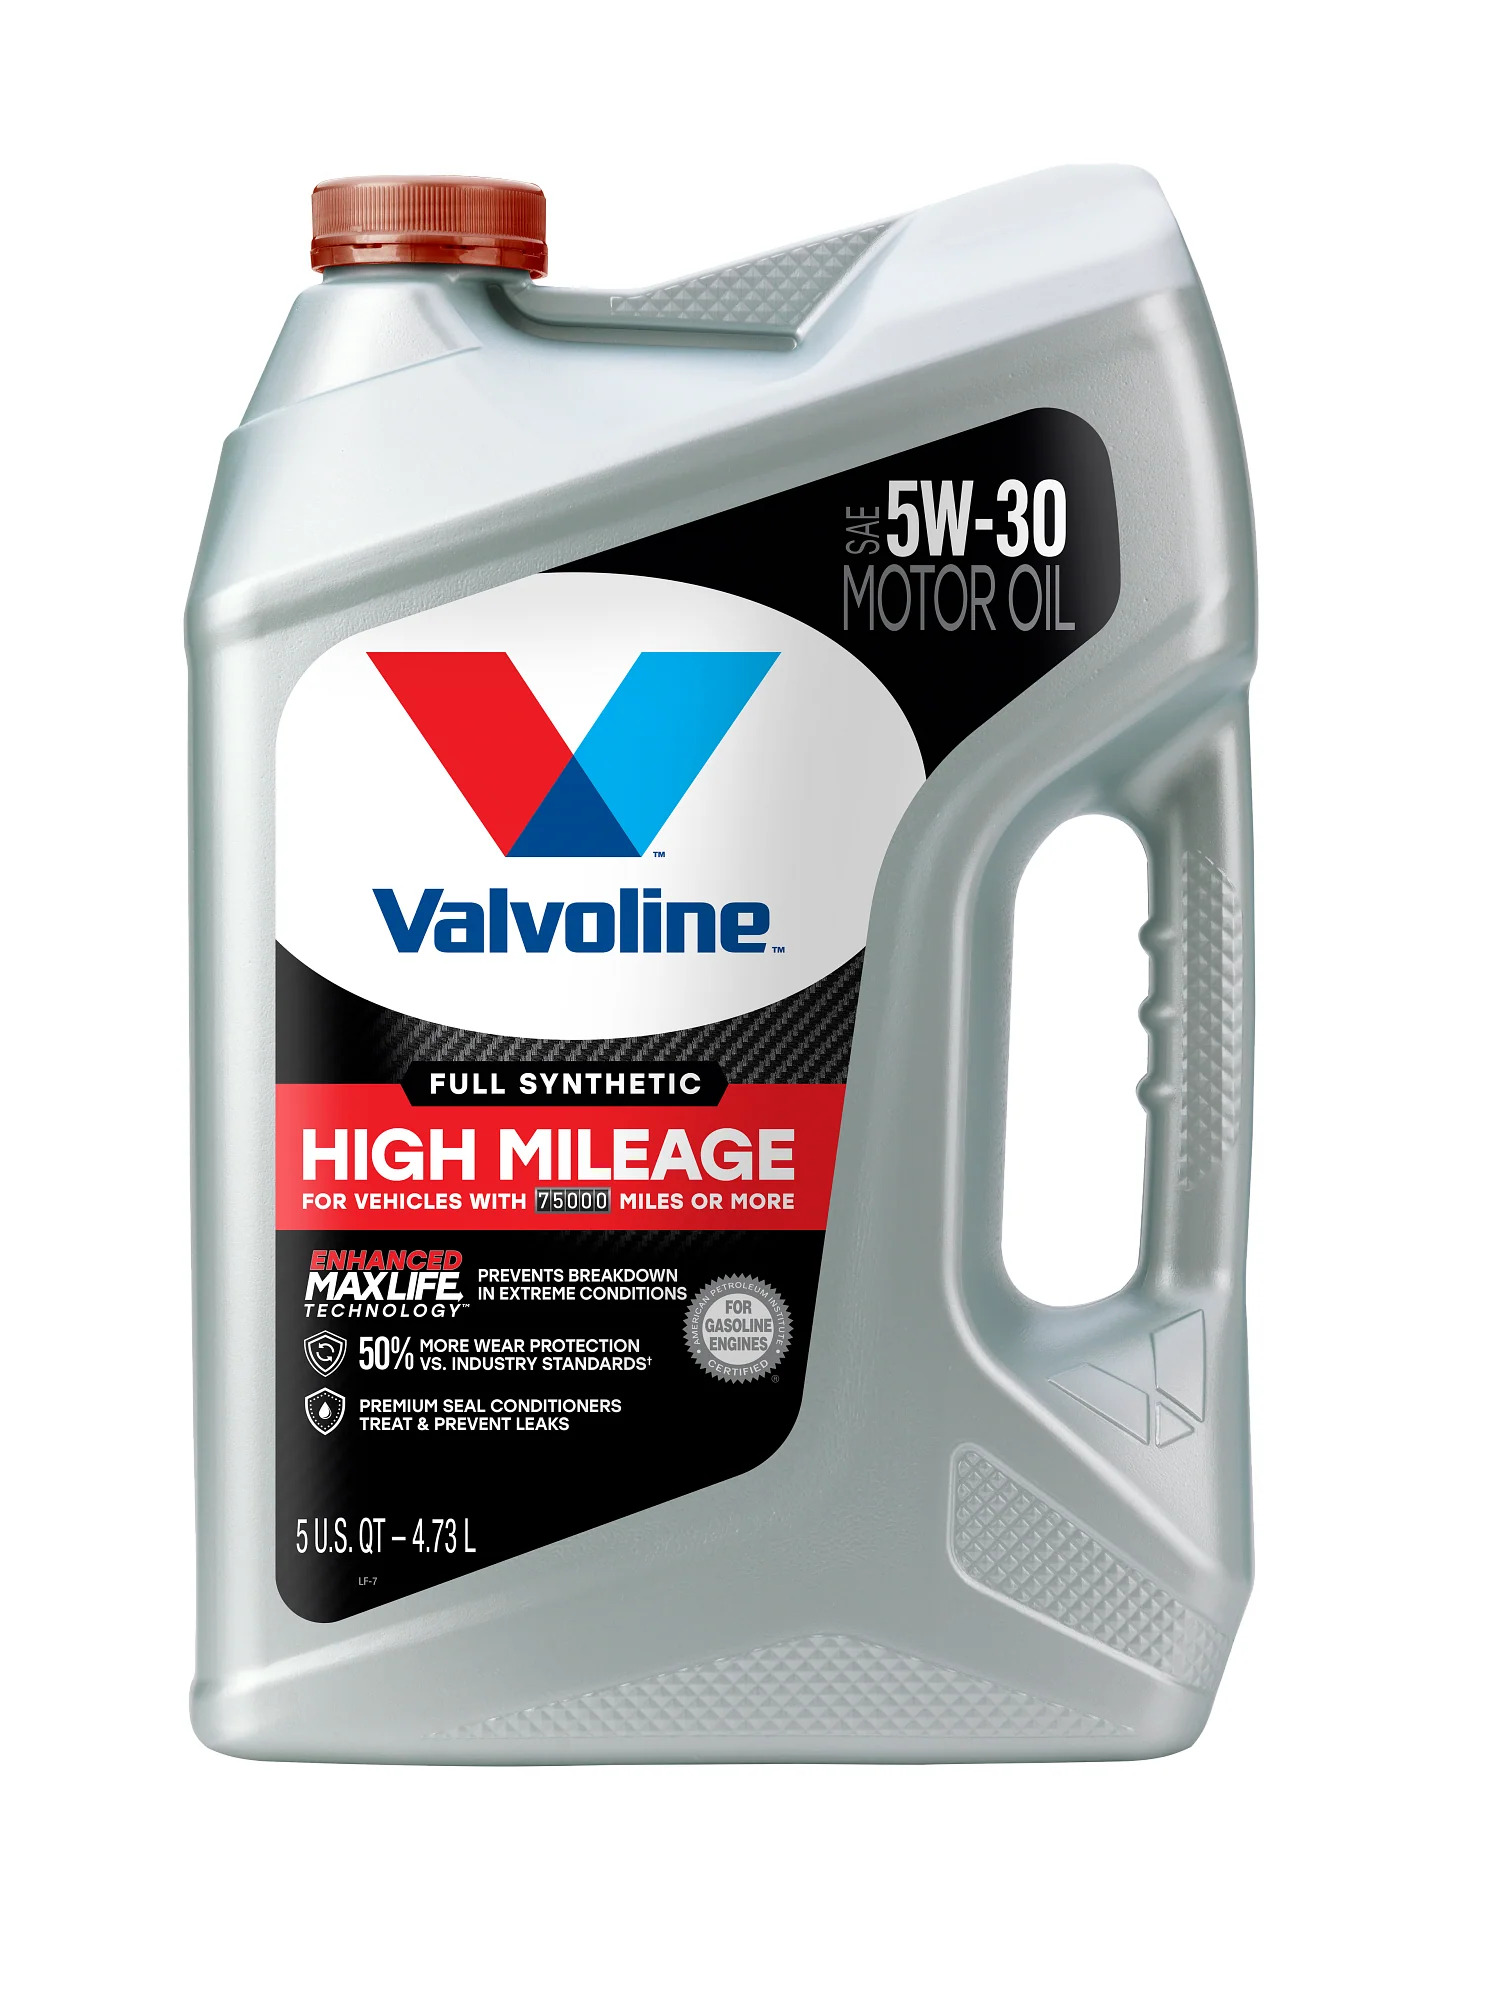 Valvoline Full Synthetic High Mileage with MaxLife Technology Motor Oil SAE 5W-30 - image 1 of 12